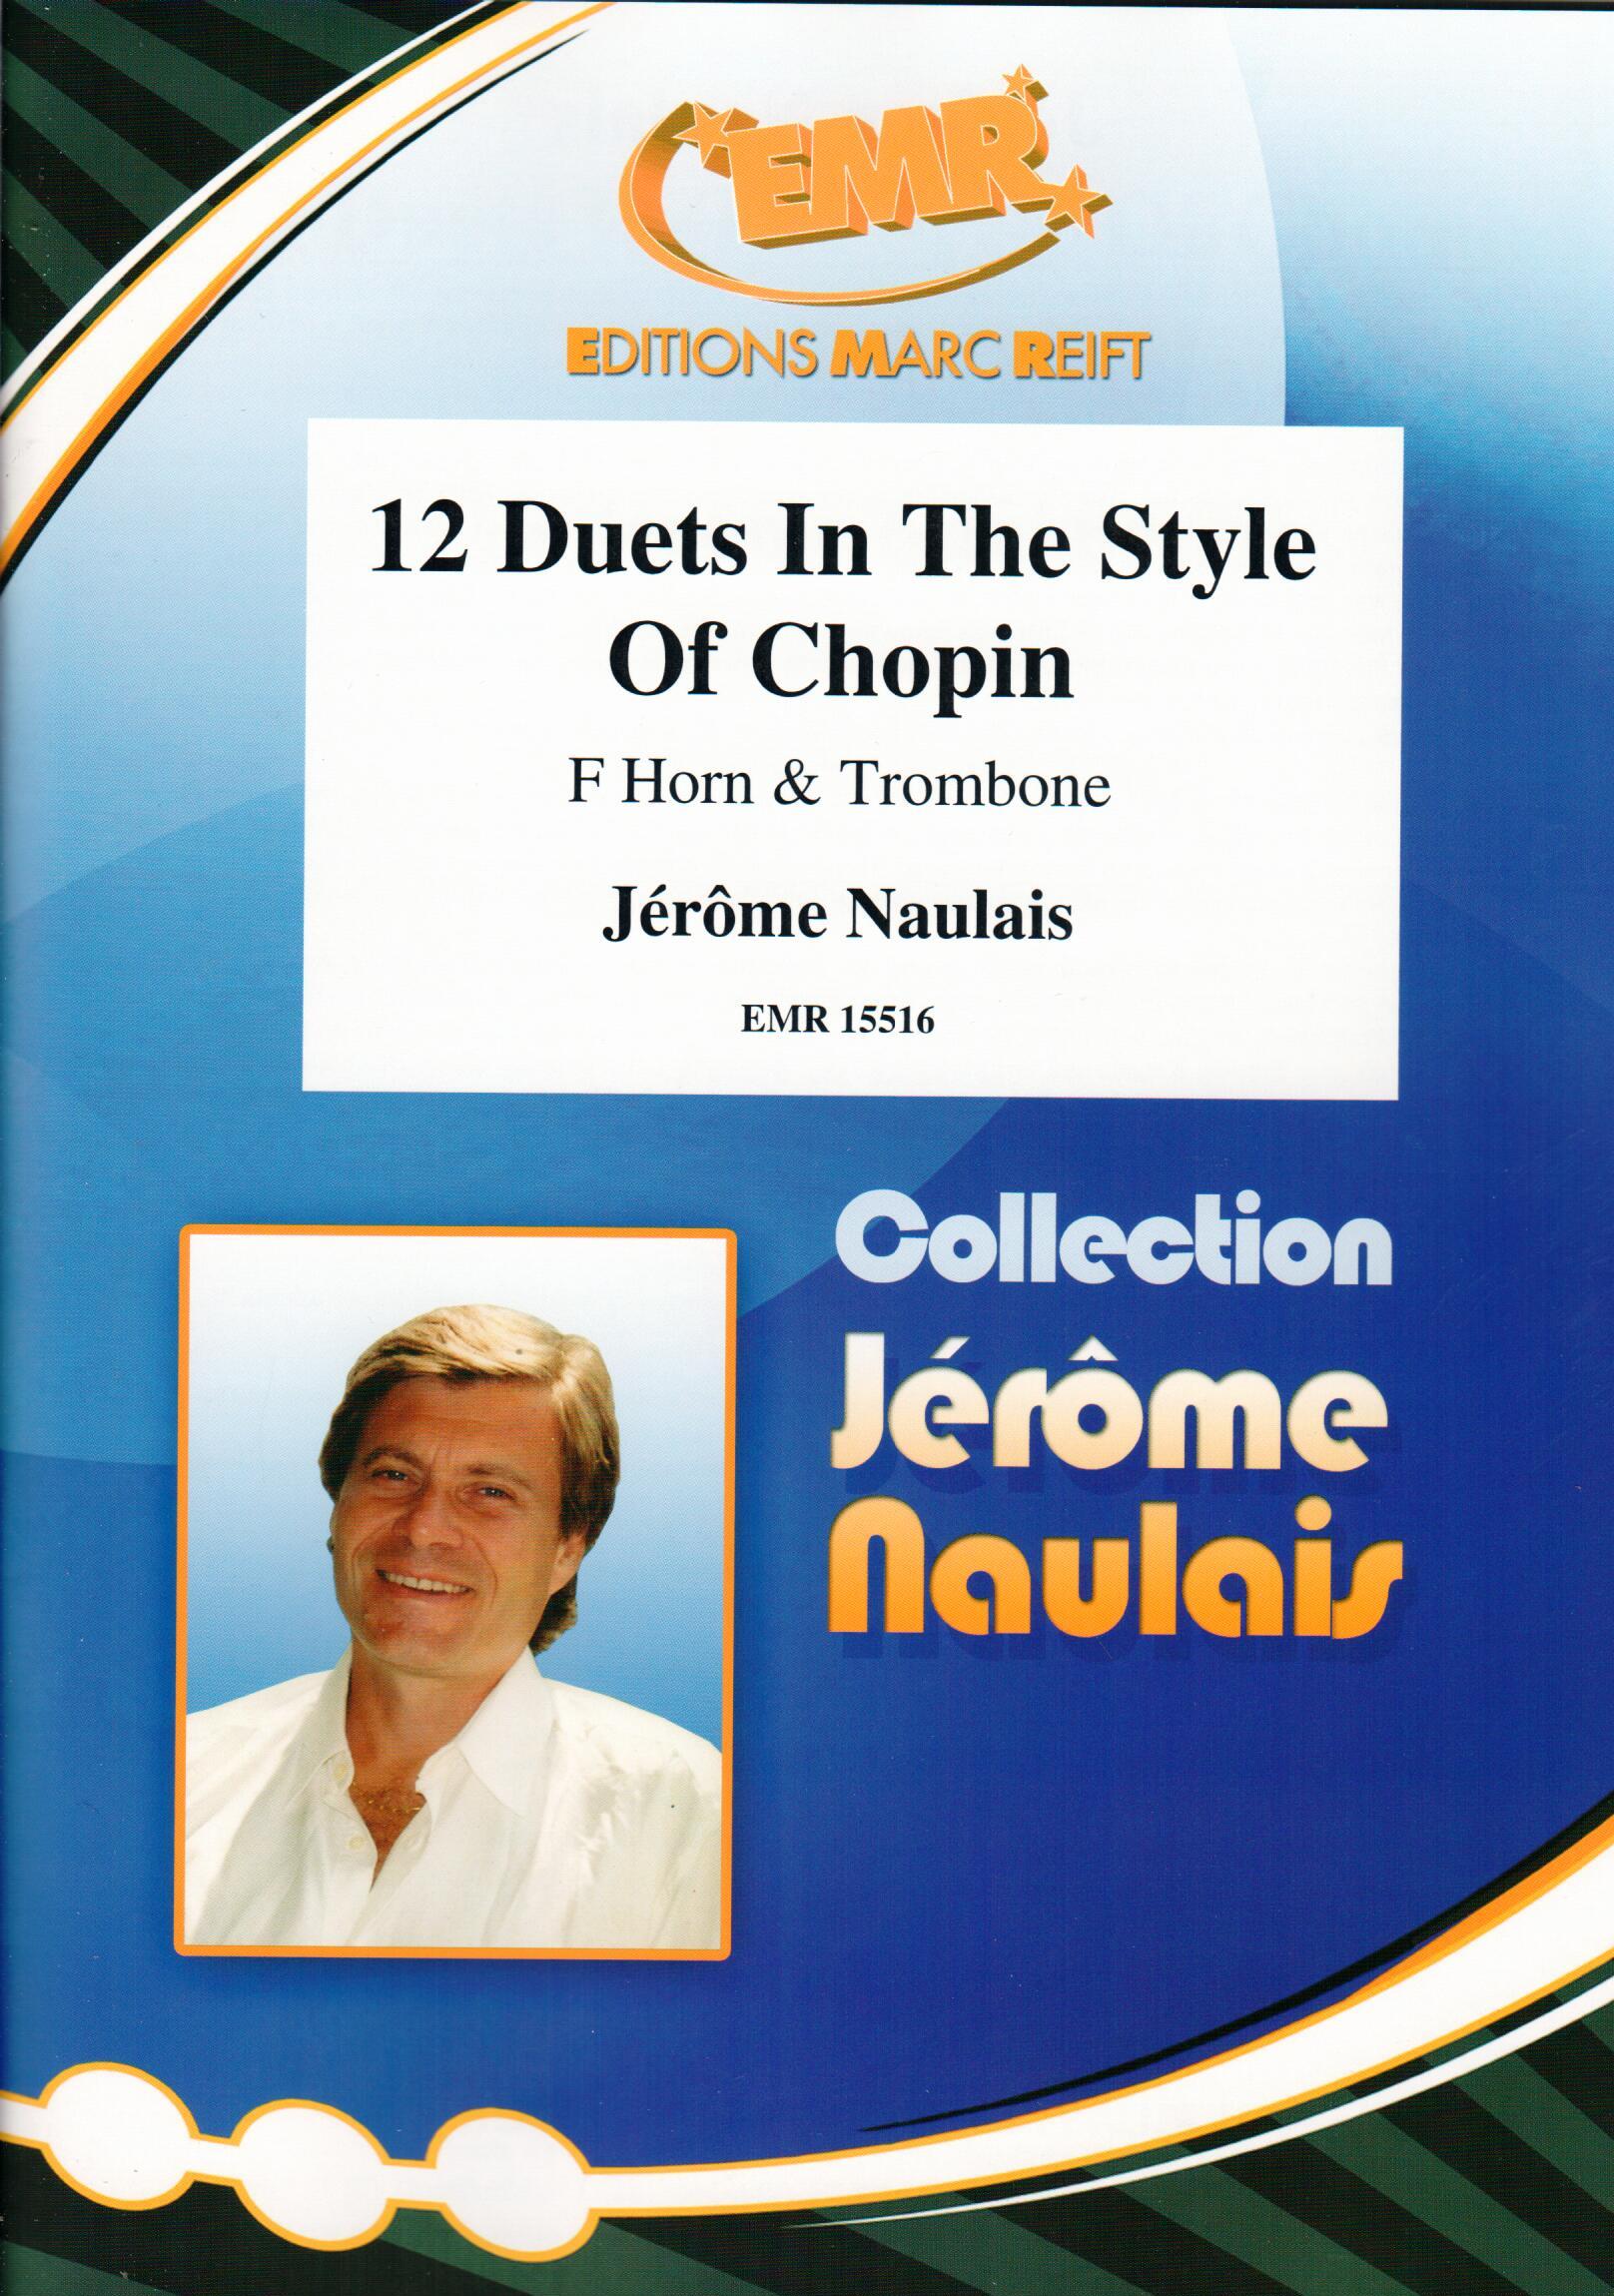 12 DUETS IN THE STYLE OF CHOPIN, Duets